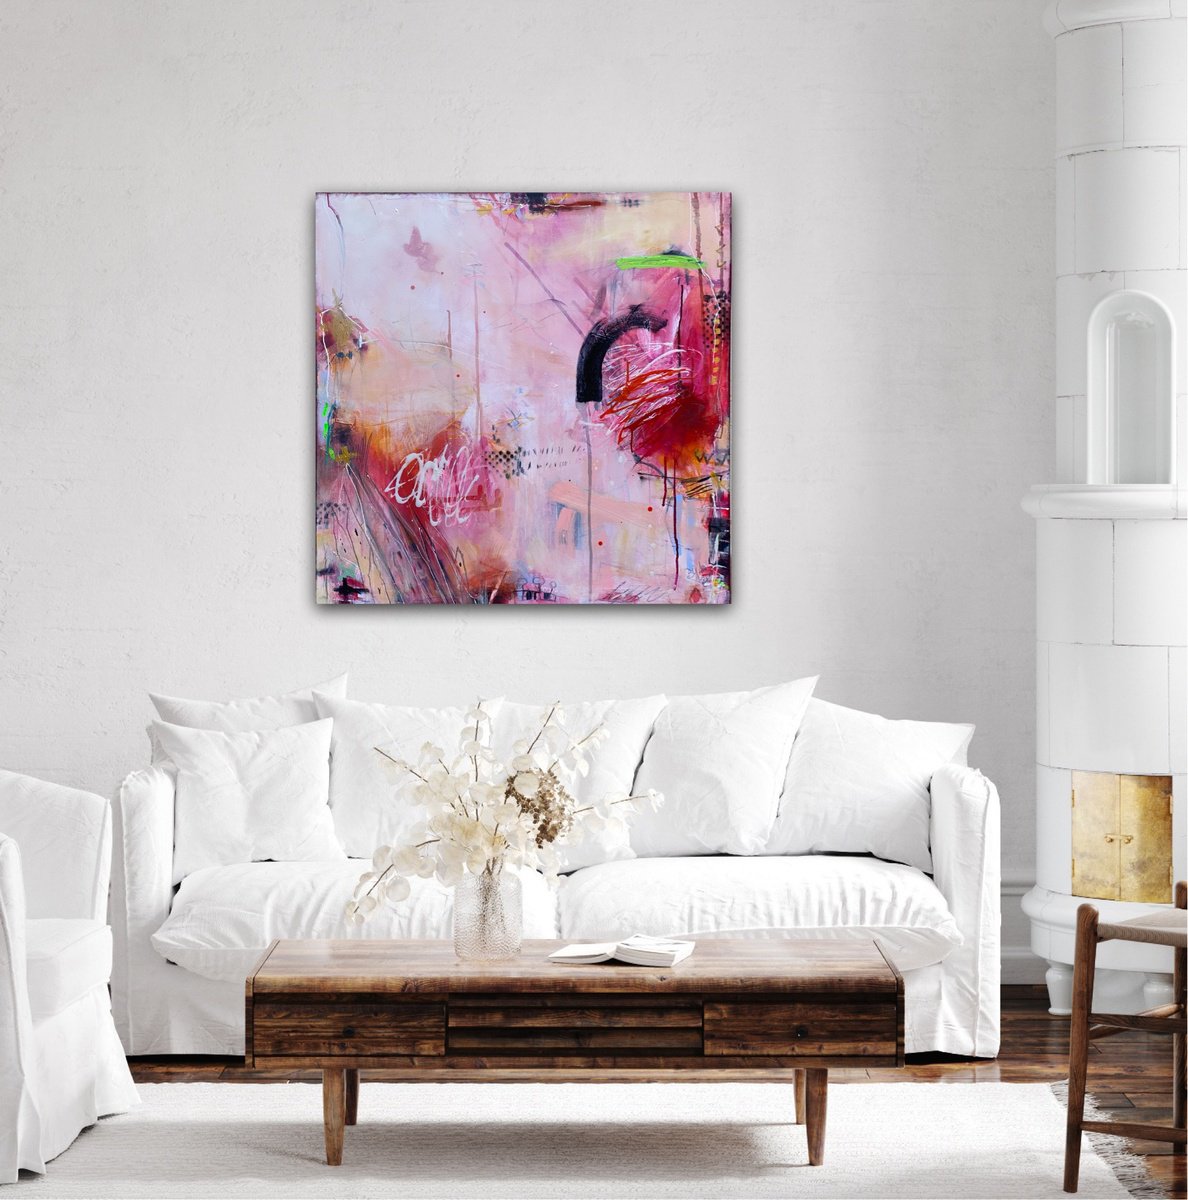 My home and my heart No.3 (Viva Magenta Collection) by Bea Garding Schubert